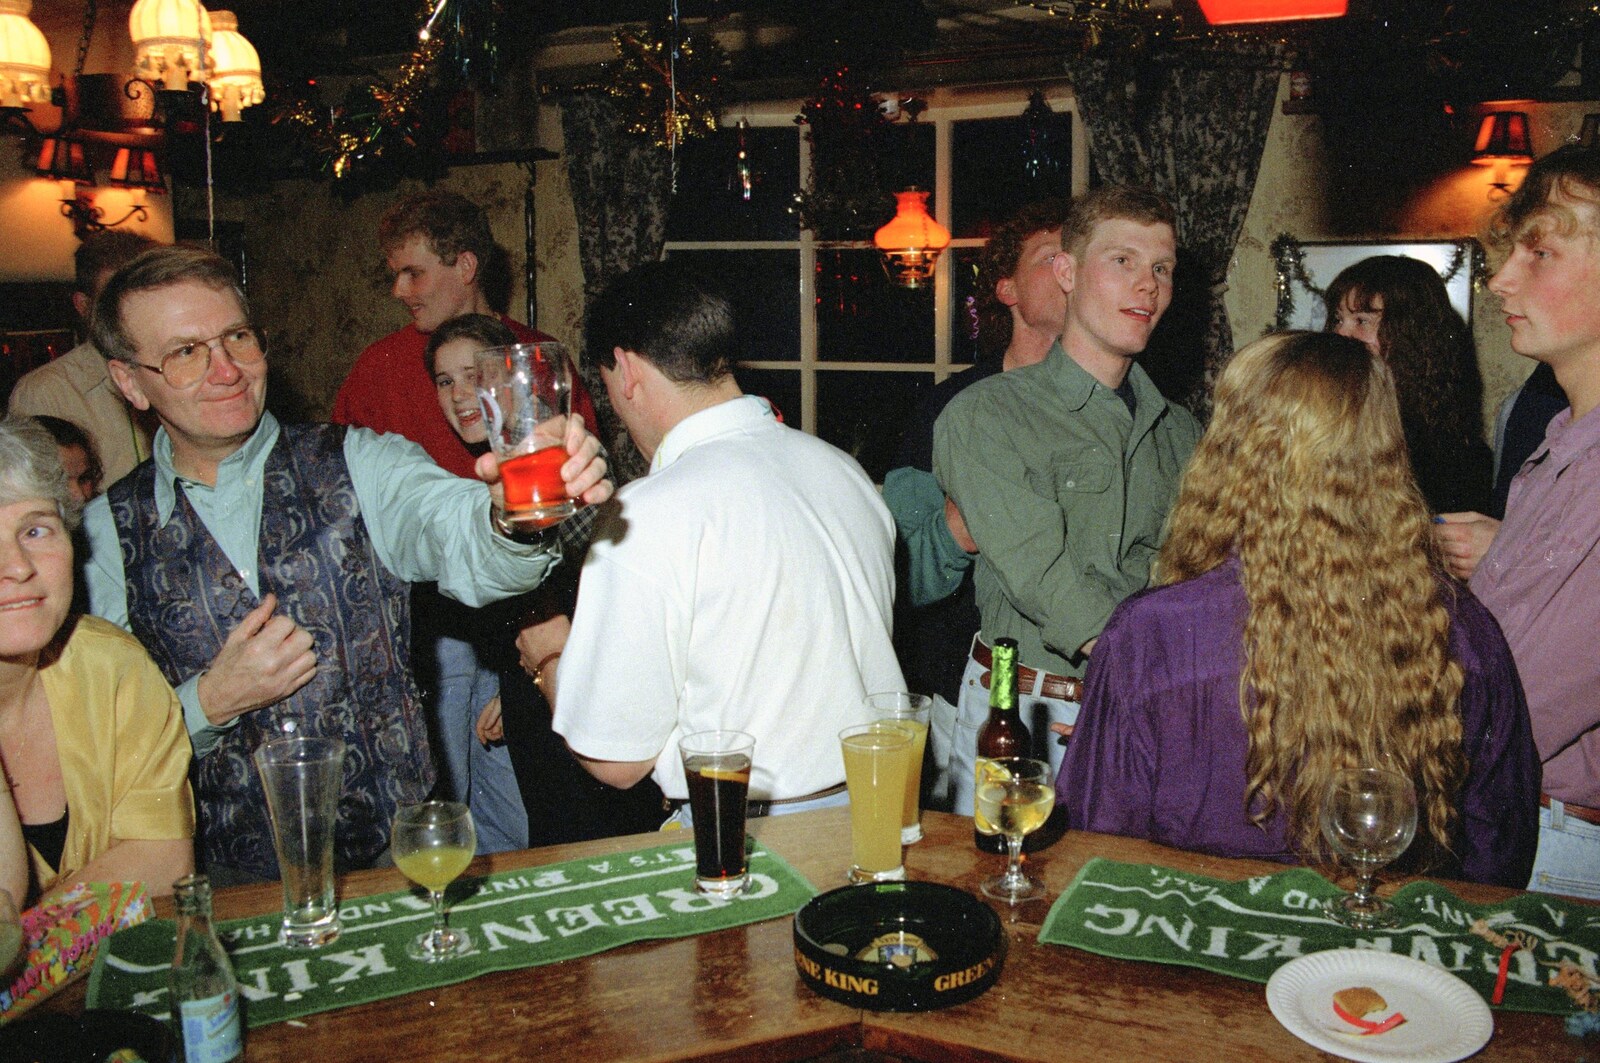 John Willy holds his glass up from New Year's Eve at the Swan Inn, Brome, Suffolk - 31st December 1994